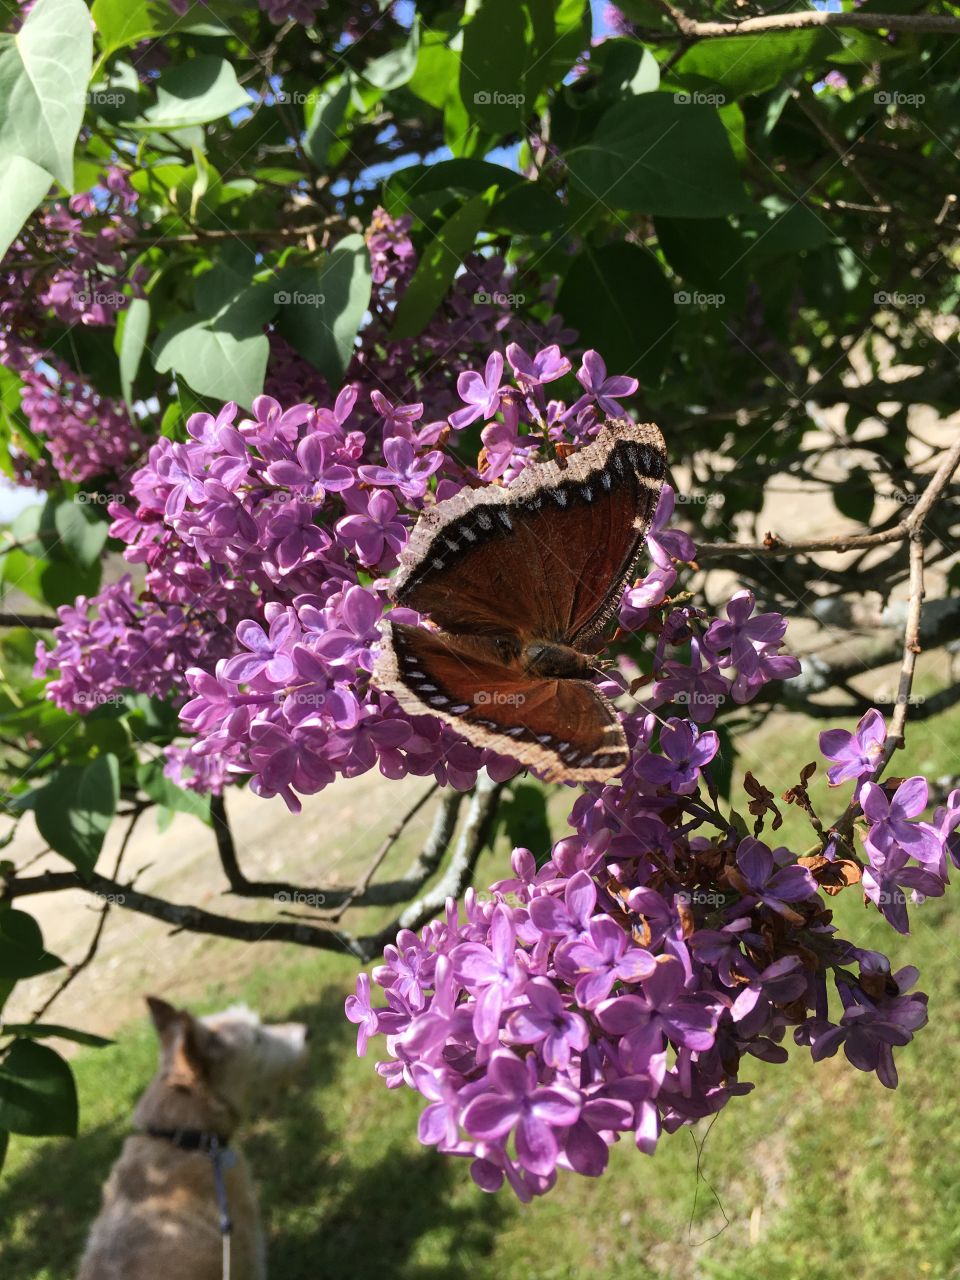 New Mourning Cloak Butterfly on Lilacs 